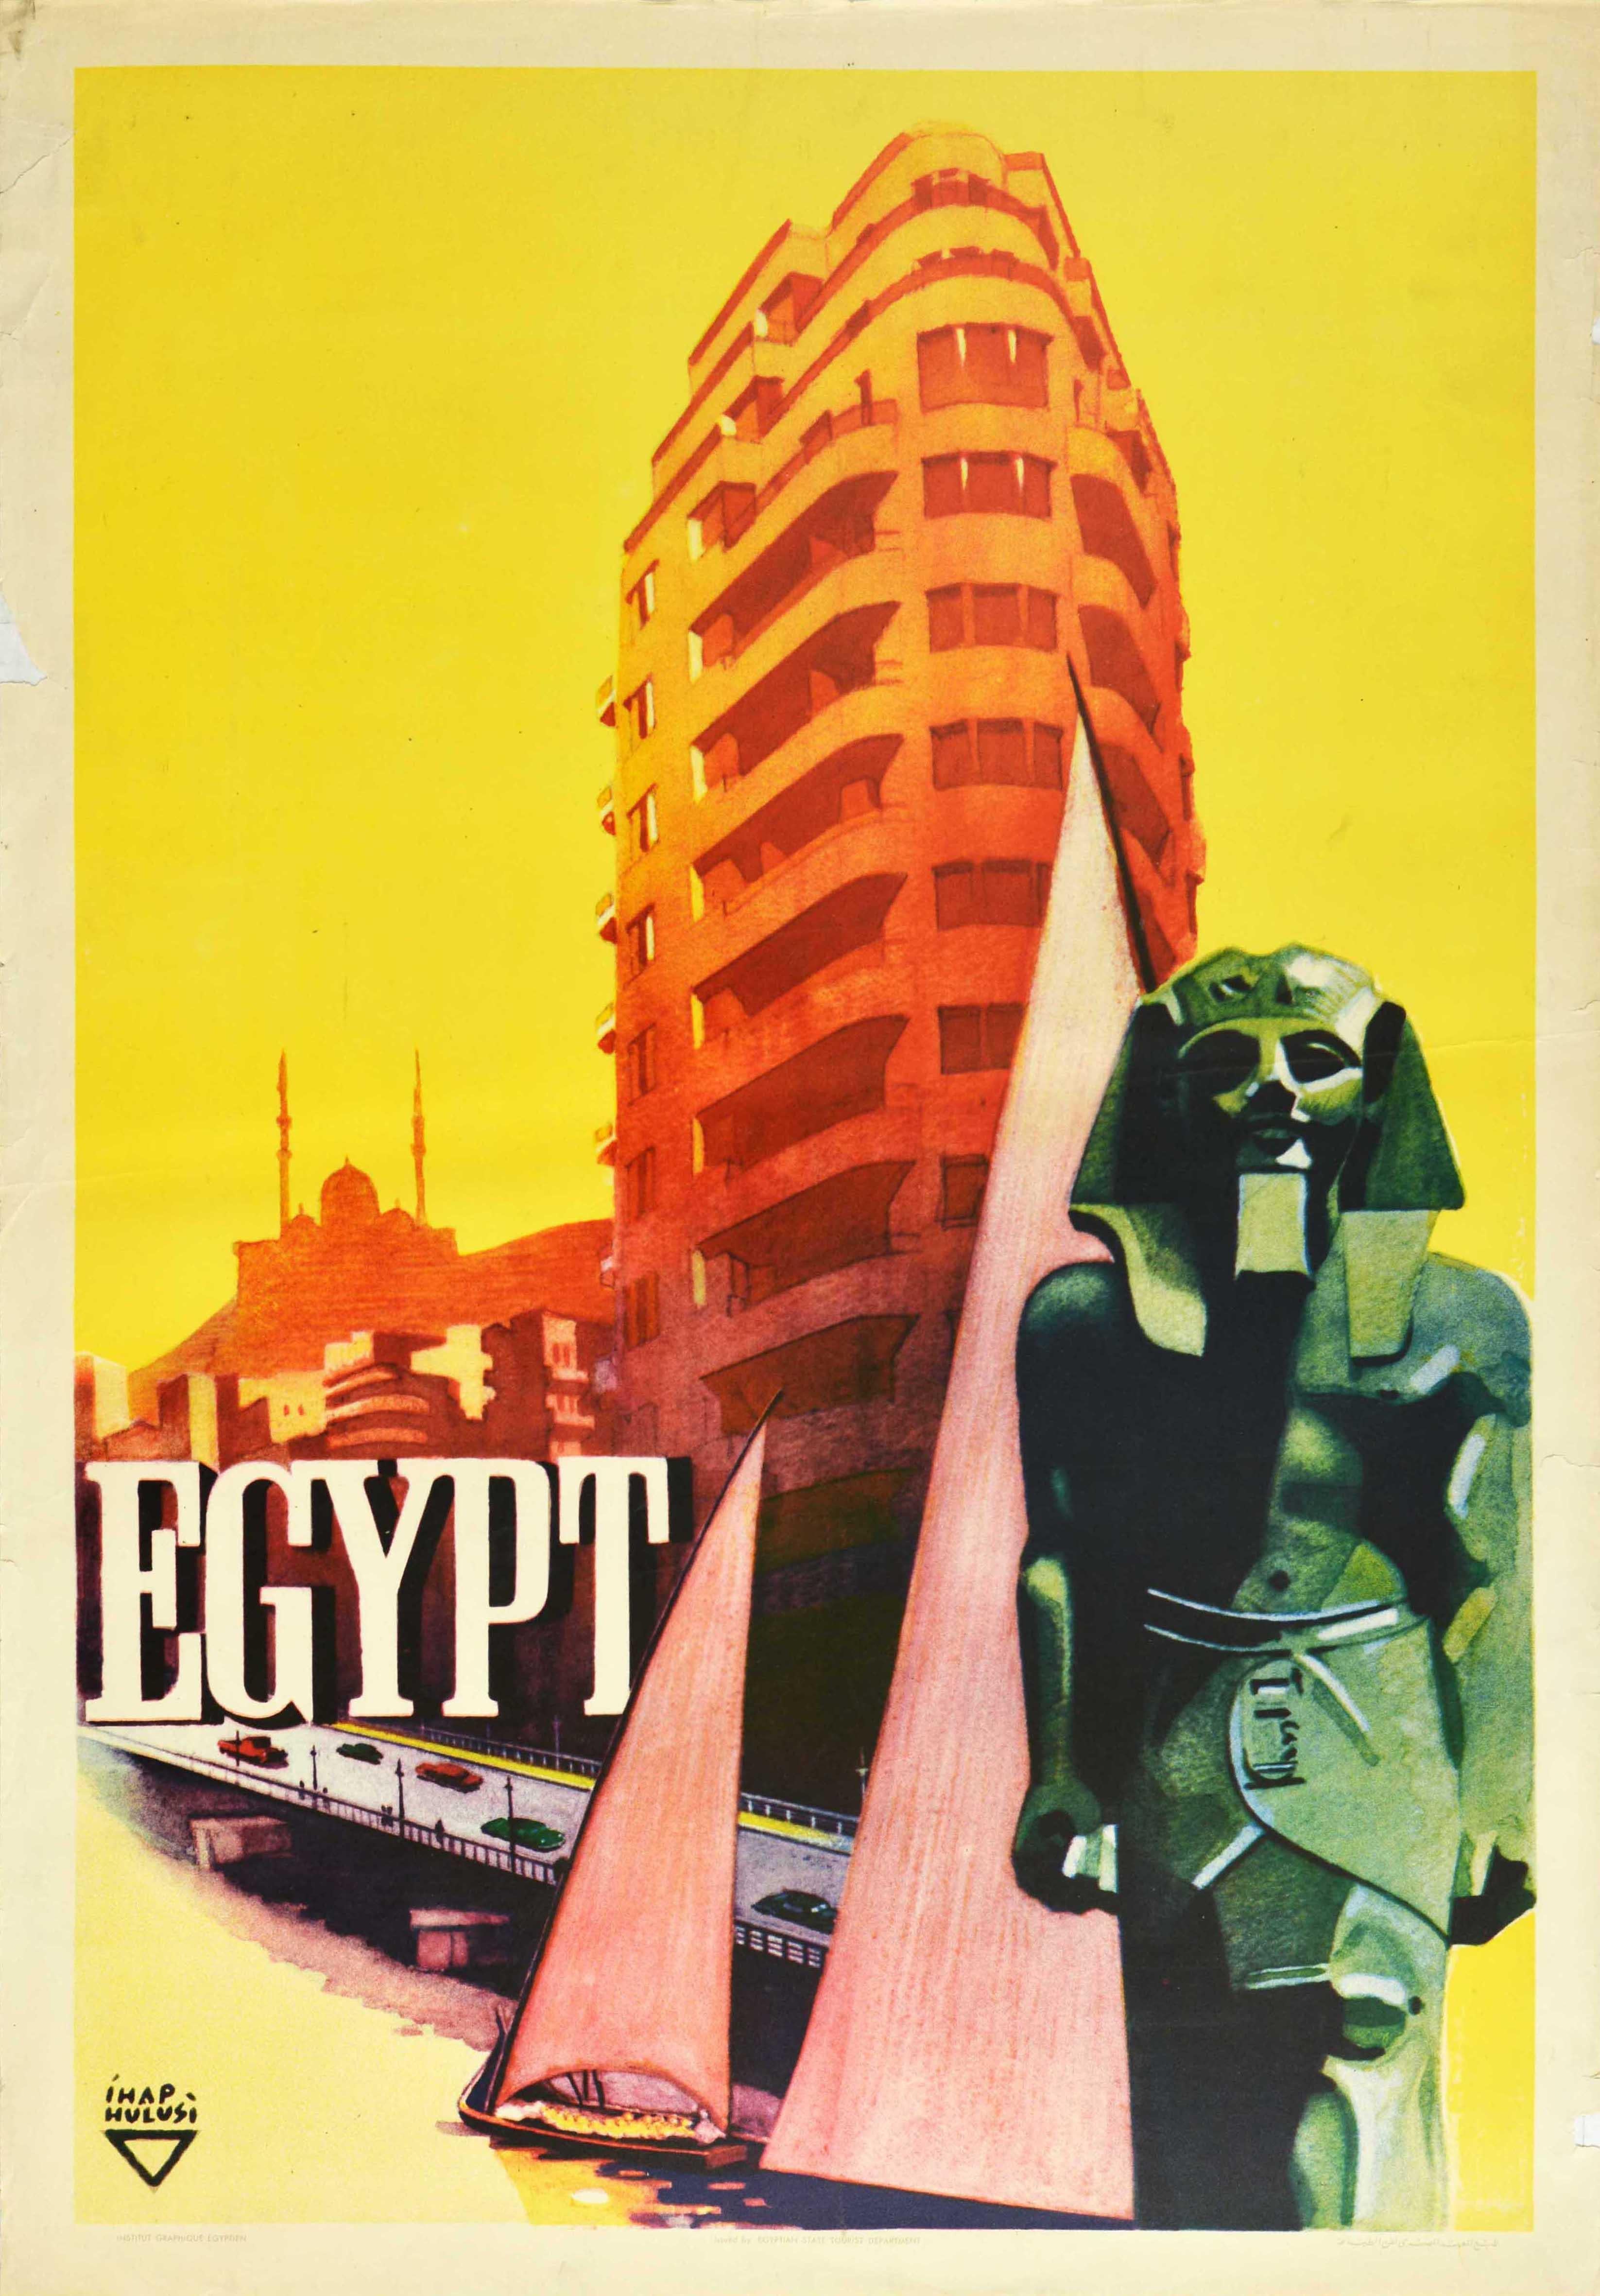 Original vintage travel poster for Egypt designed by the Turkish graphic artist Ihap Hulusi (1898-1986) featuring an illustration of a triangular shaped building in front of a silhouette of a mosque in the distance, cars on a road bridge driving